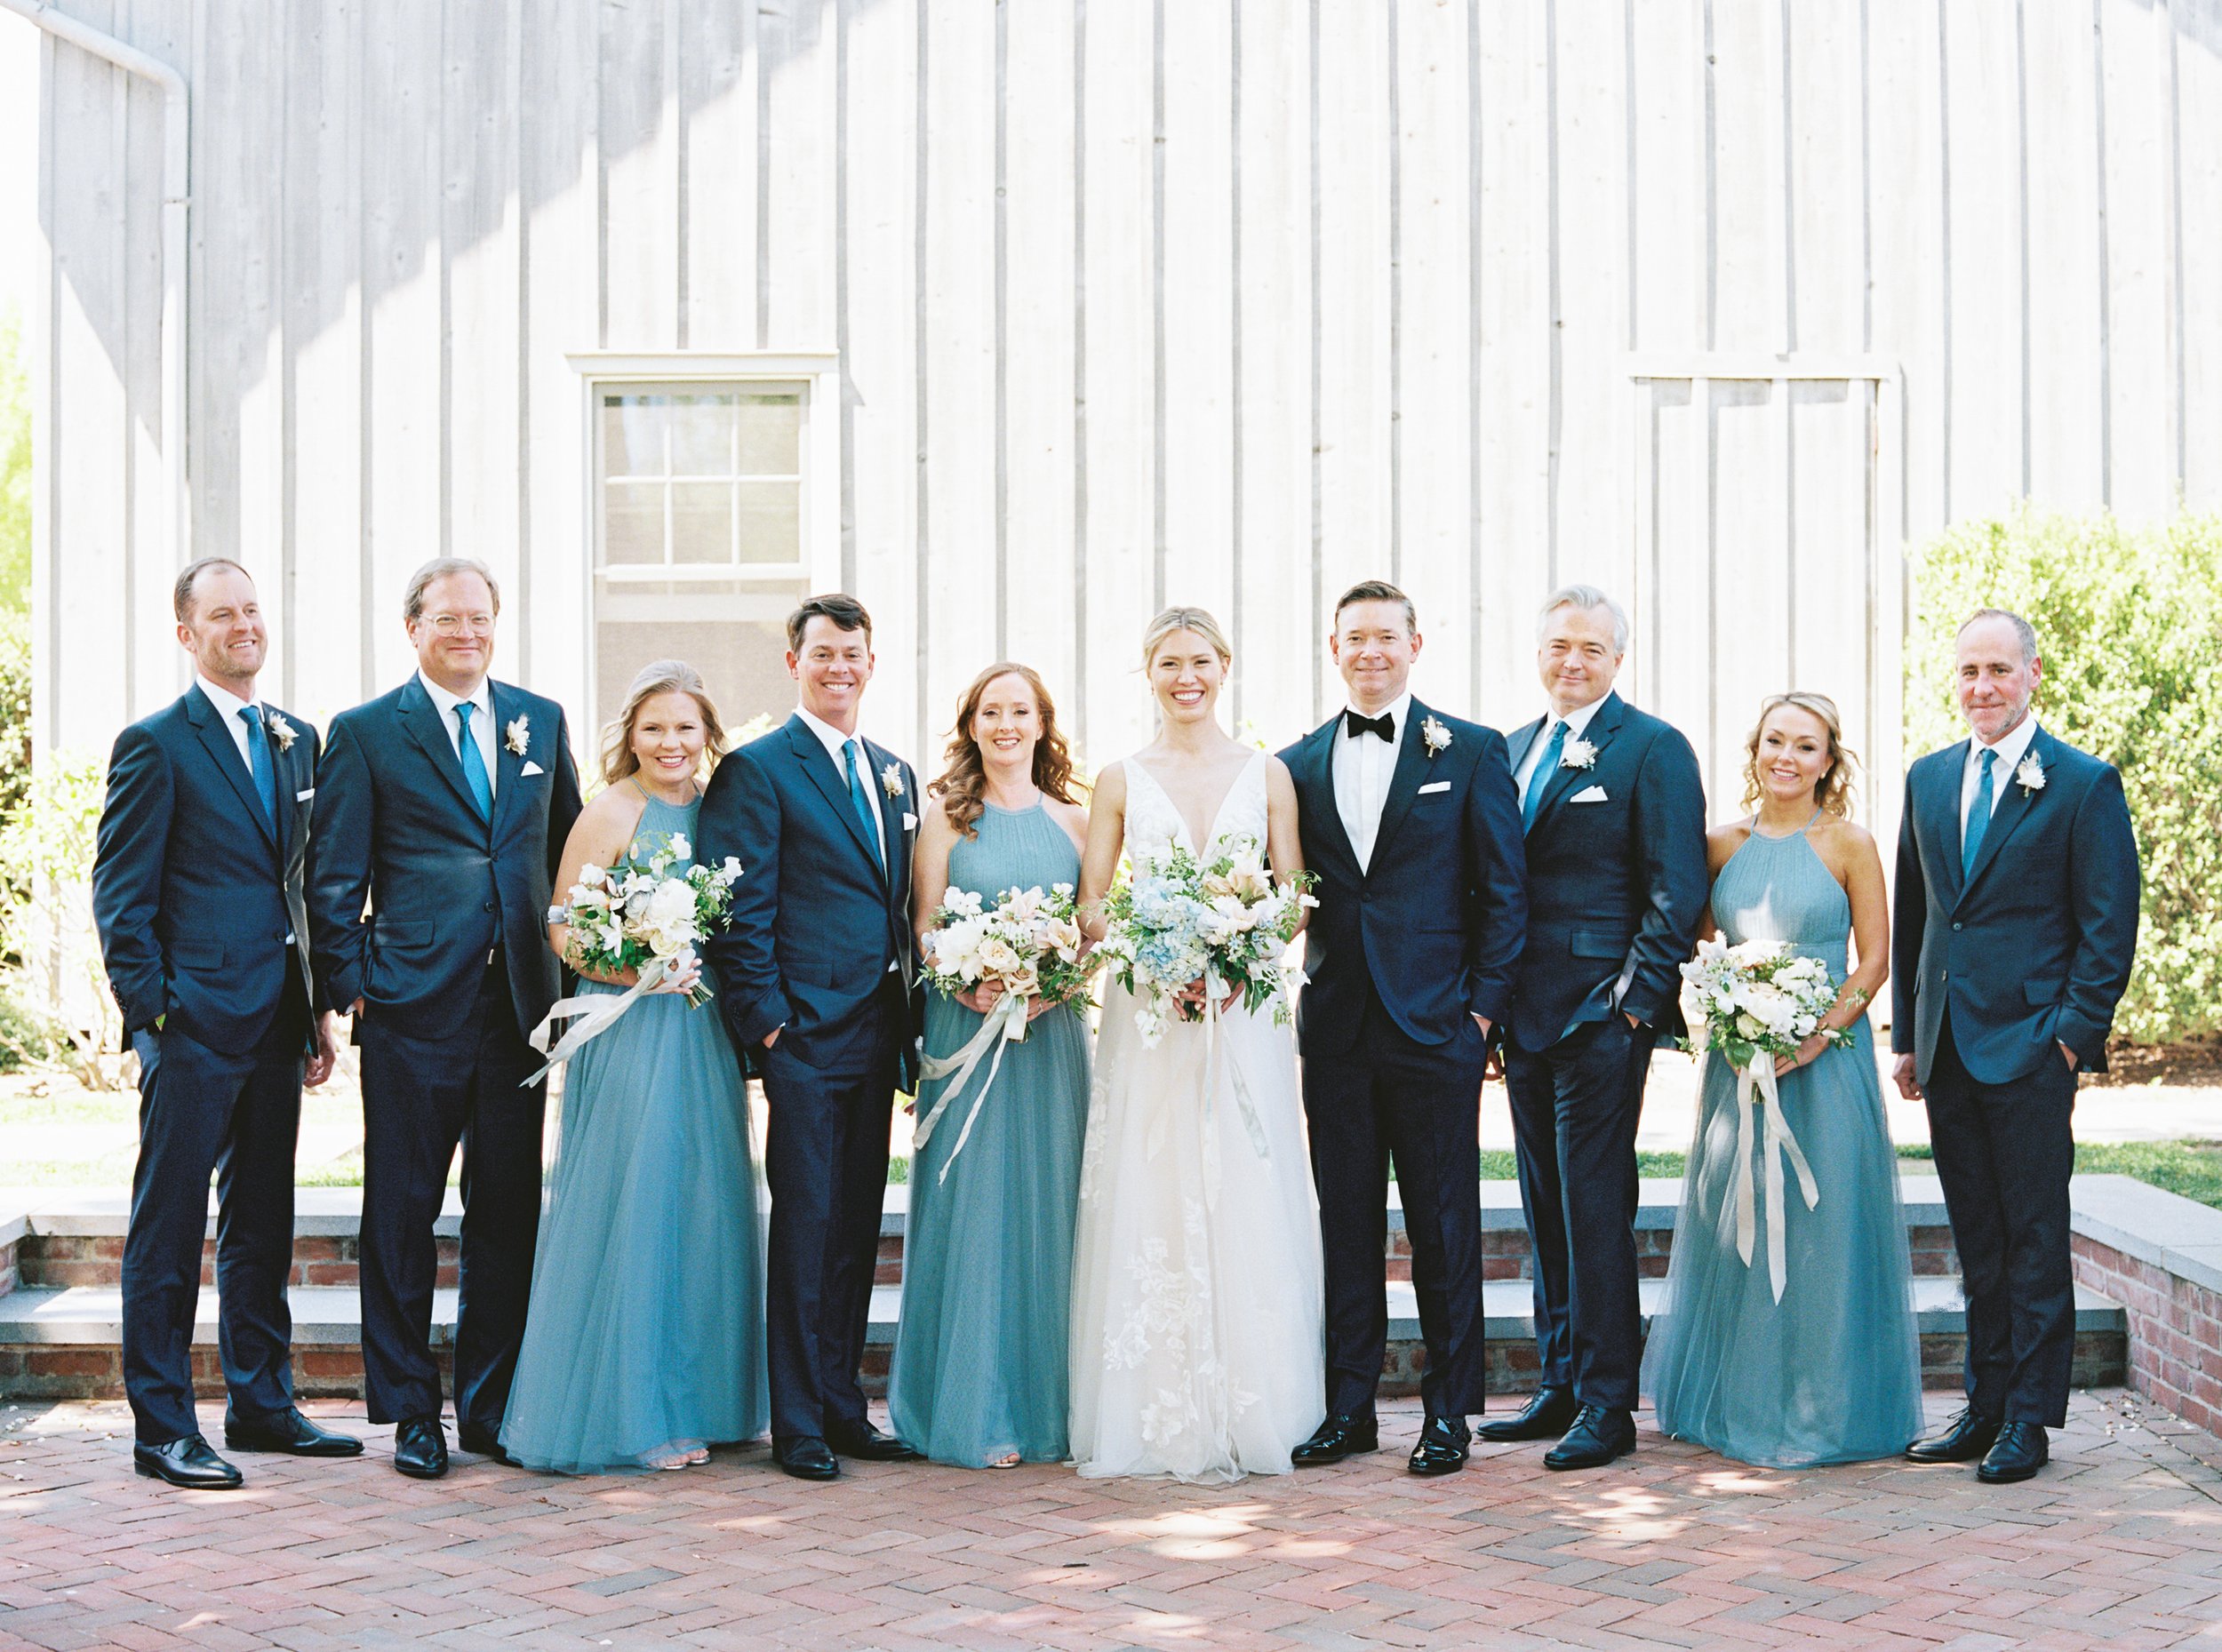 Bridal Party Photos at Topping Rose House in The Hamptons, NY